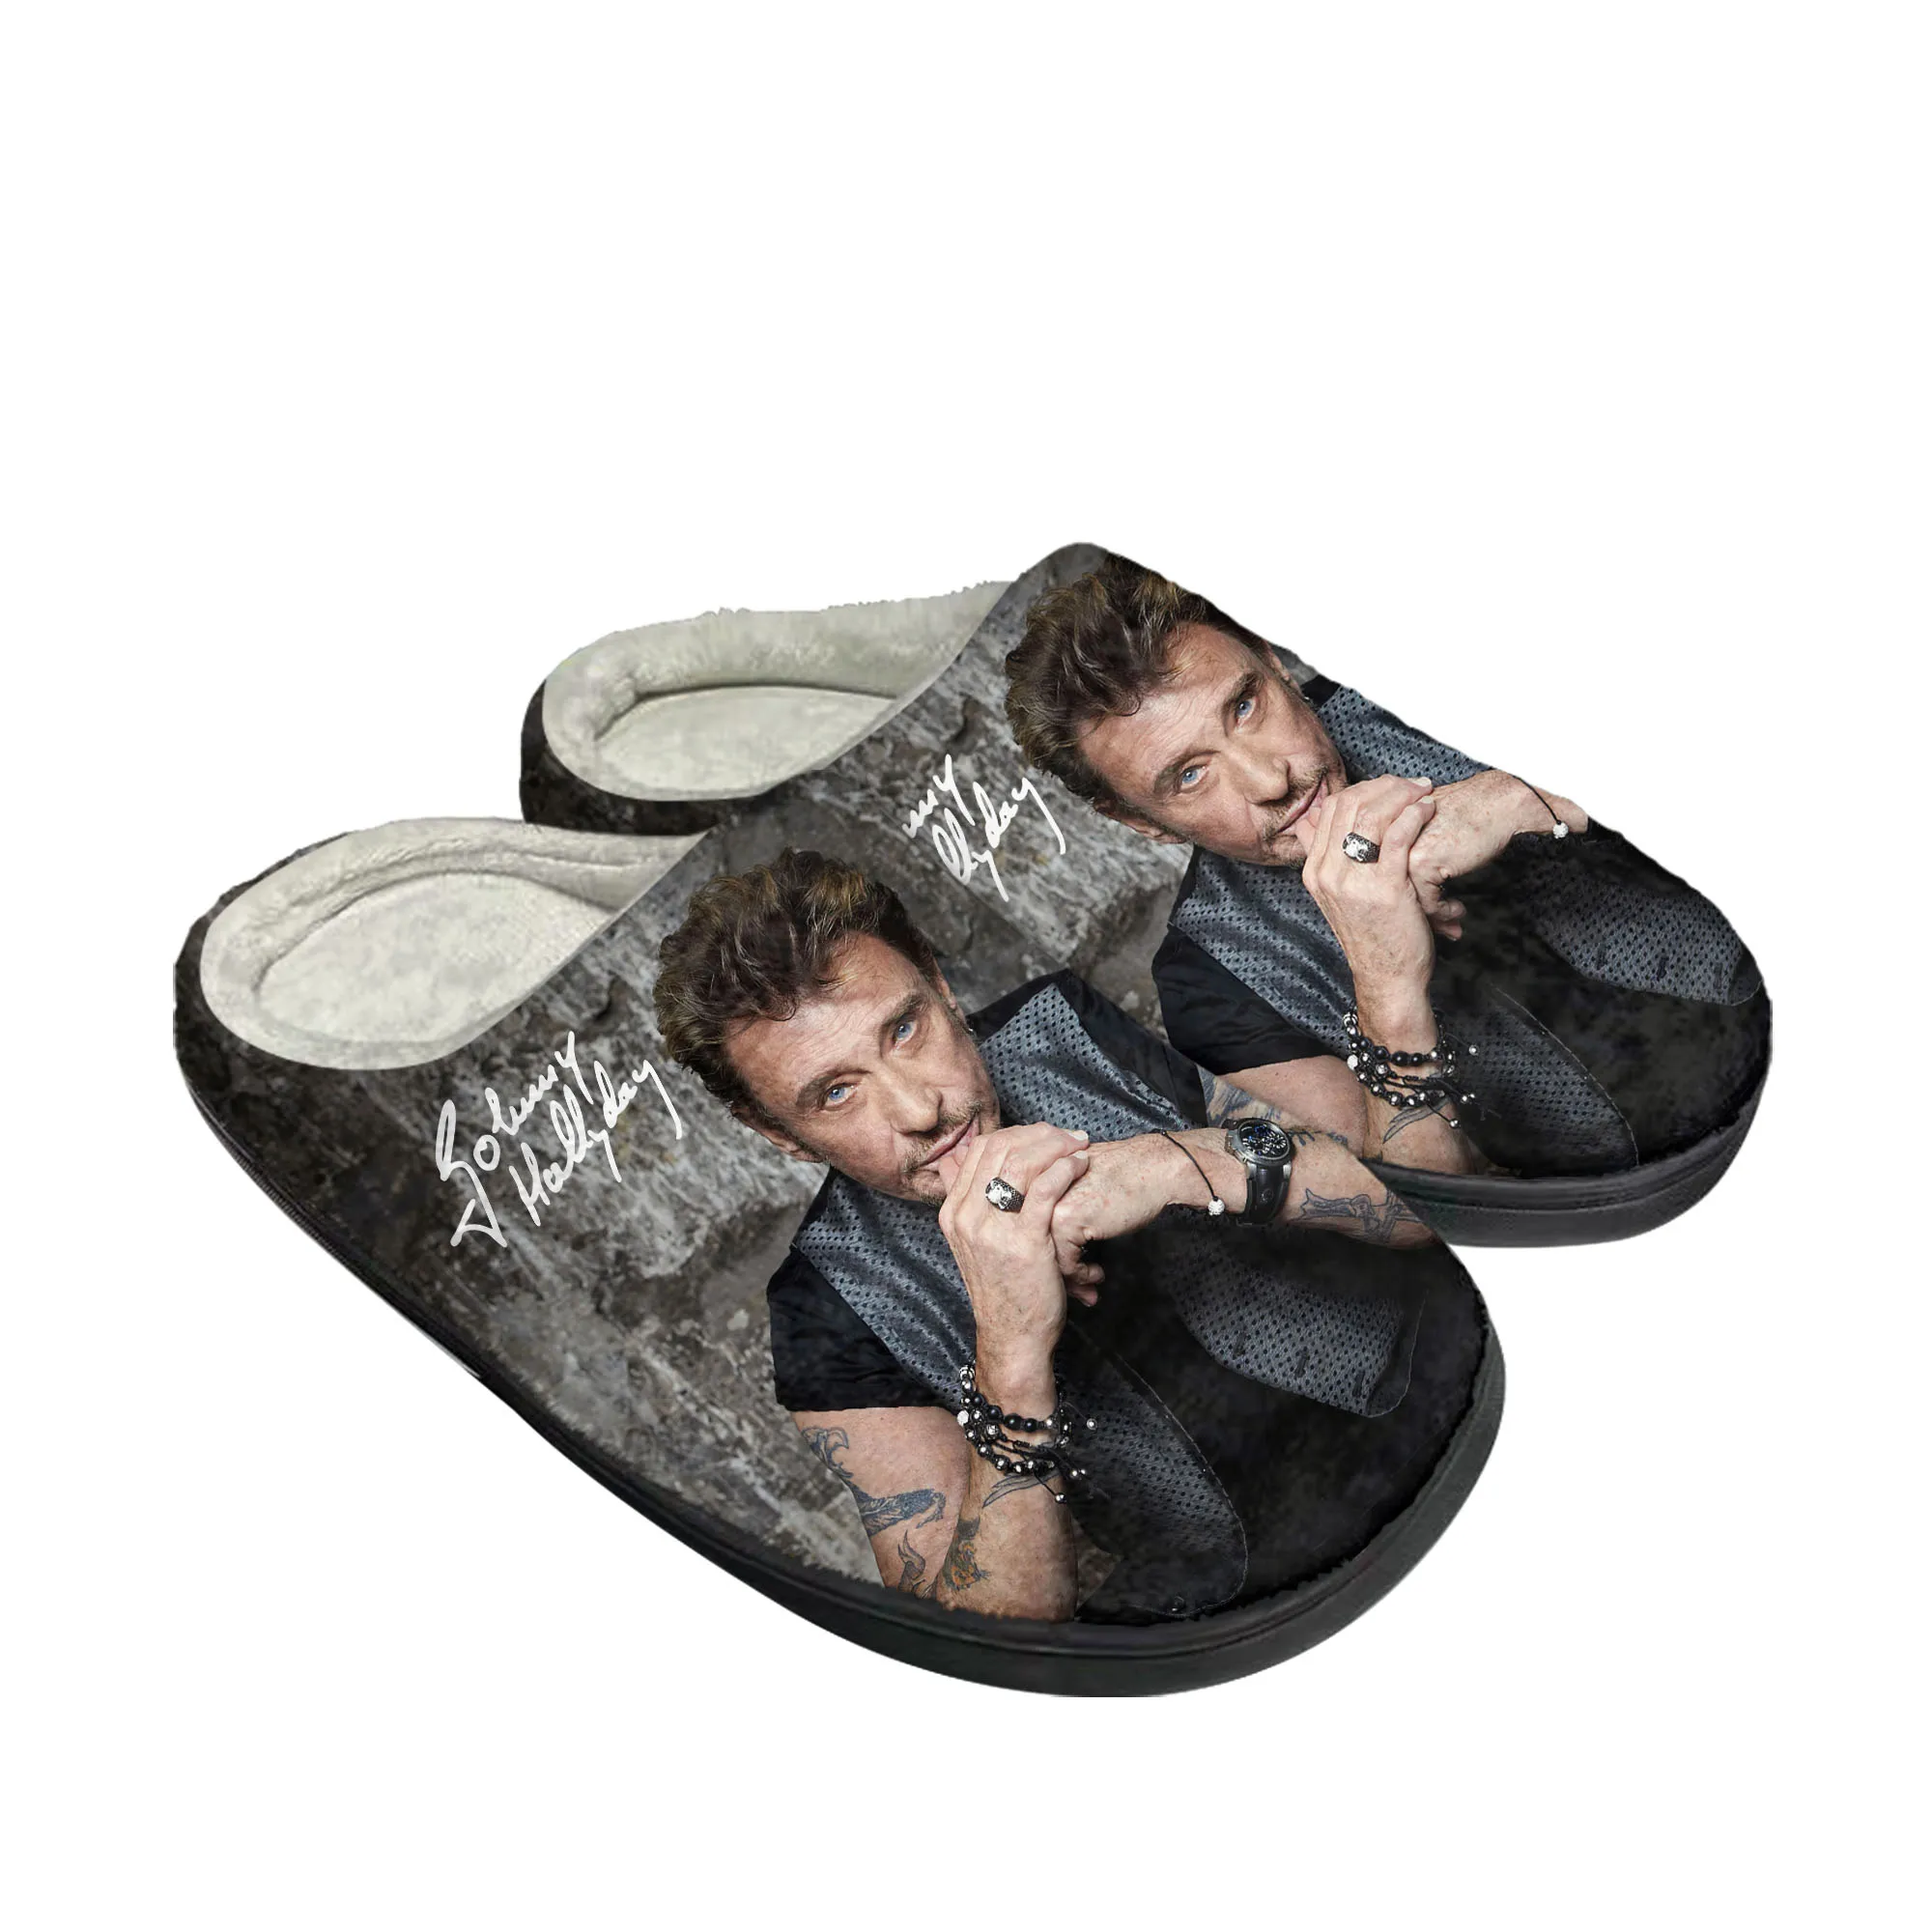 

Johnny Hallyday Rock Singer Home Cotton Custom Slippers Mens Women Sandals Plush 3D Print Casual Keep Warm Shoes Thermal Slipper